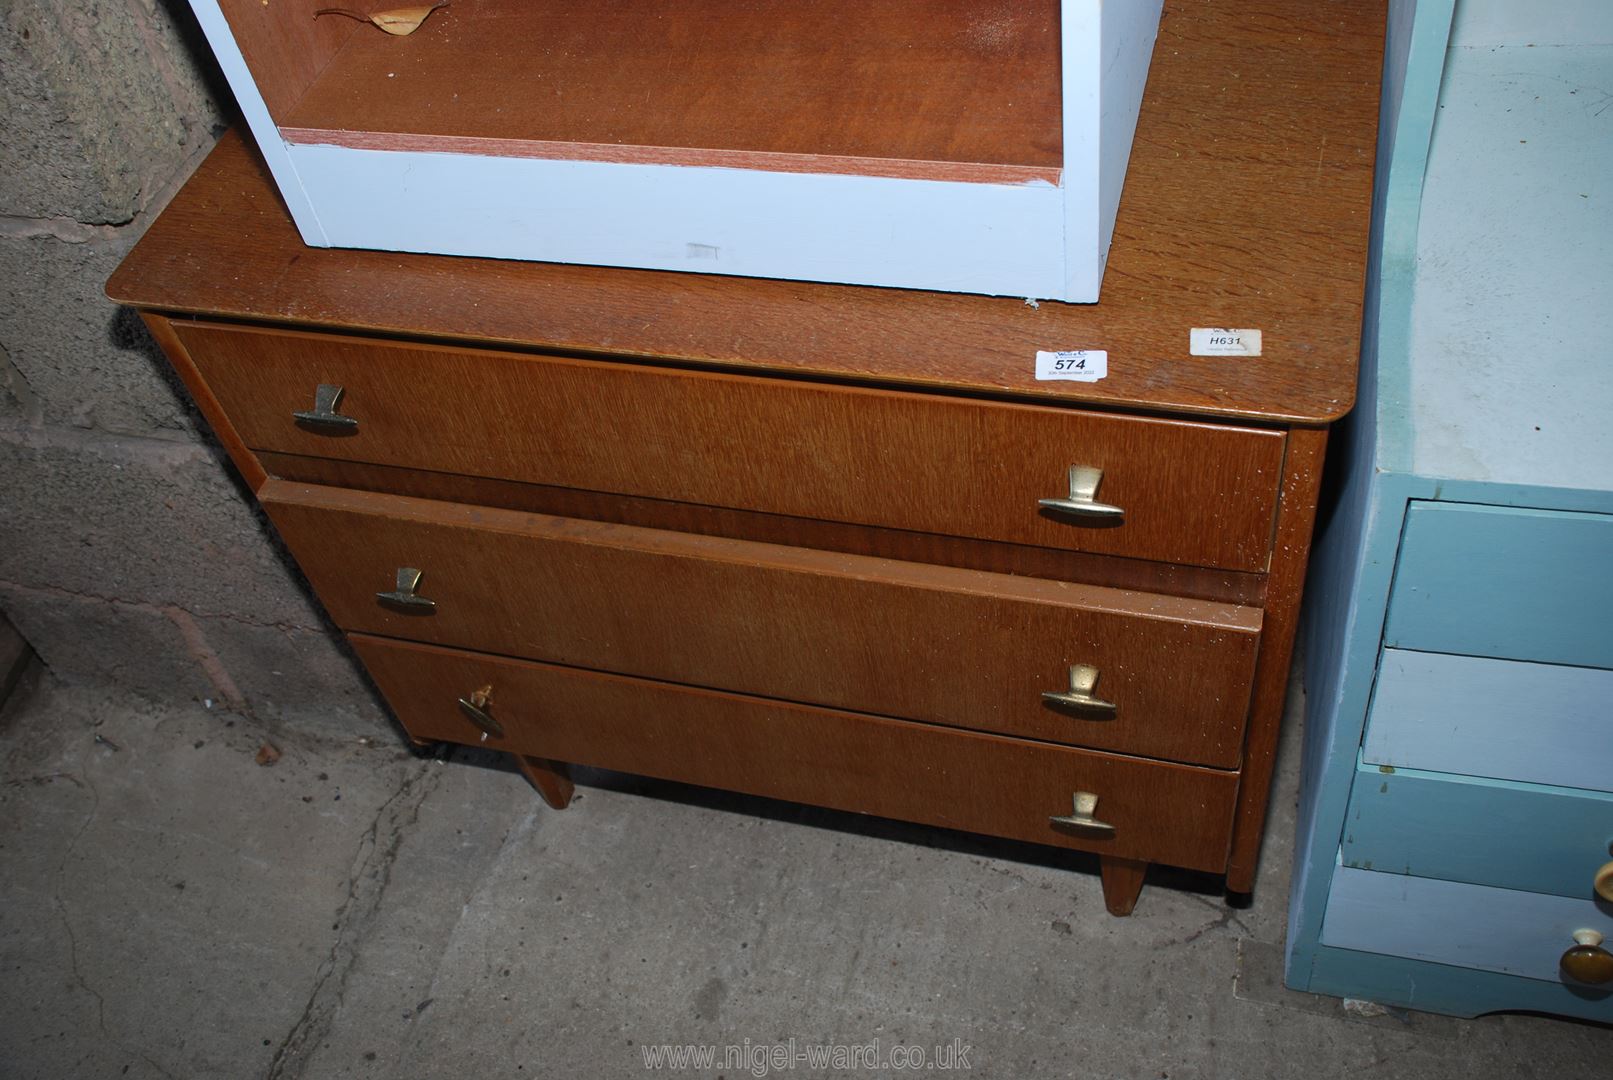 A 3 drawer chest of drawers, 31" wide x 17" deep x 28" high.